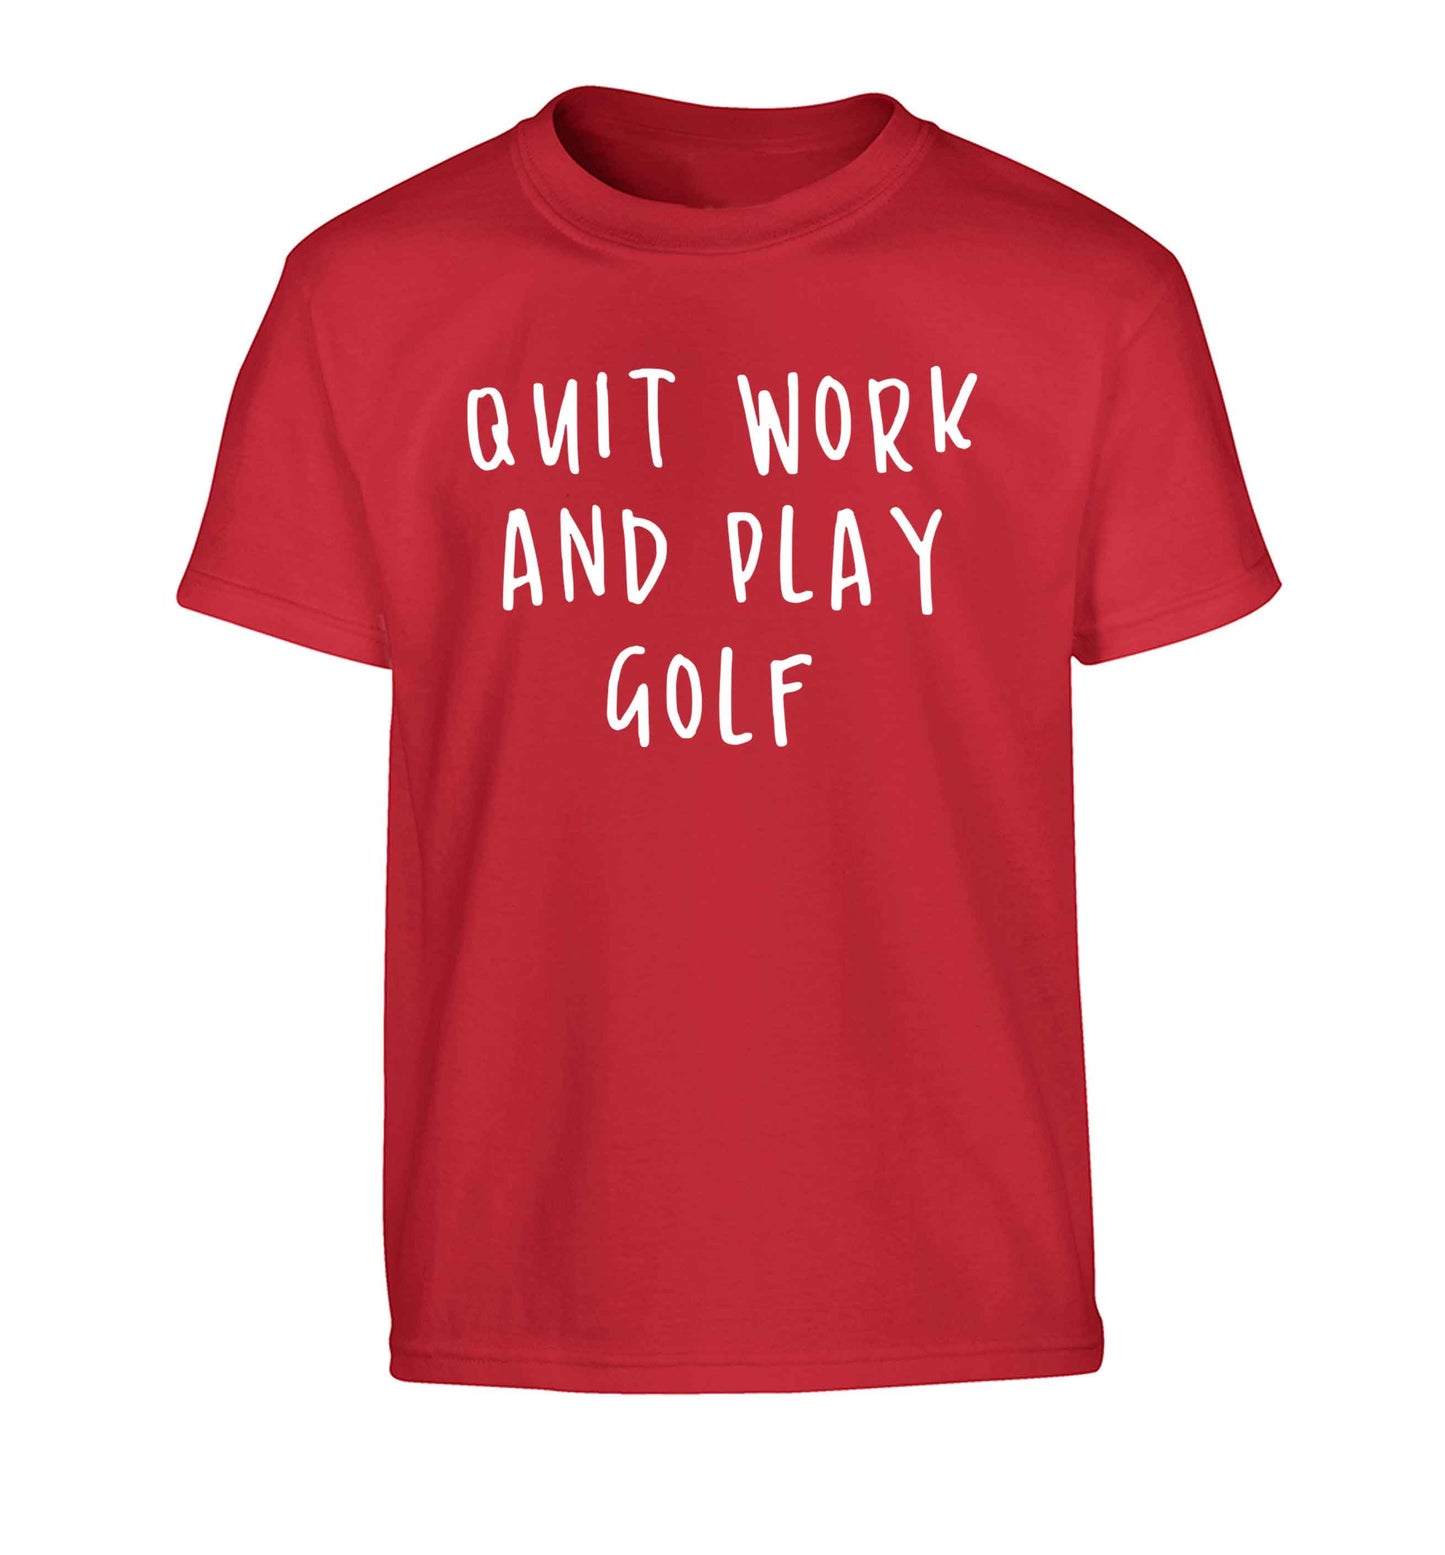 Quit work and play golf Children's red Tshirt 12-13 Years